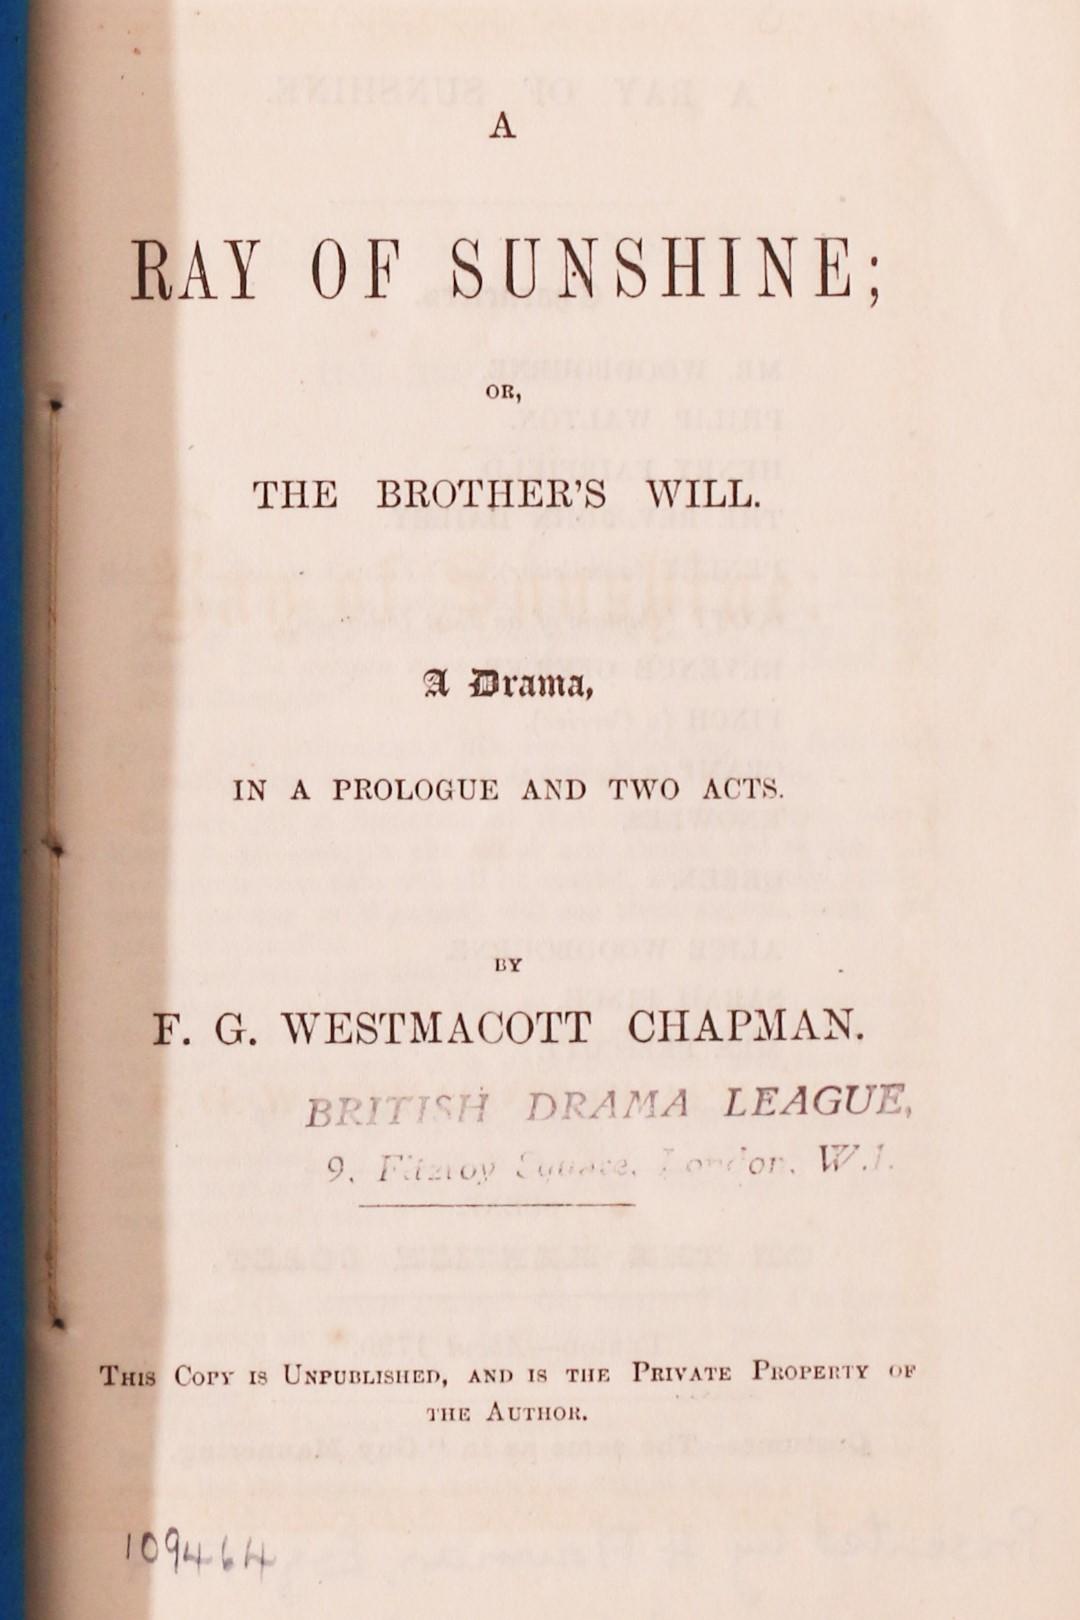 F.G. Westmacott Chapman - A Ray of Sunshine or The Brother's Will, A Drama. In a Prologue and Two Acts - Privately Printed, n.d. [c1860?], First Edition.